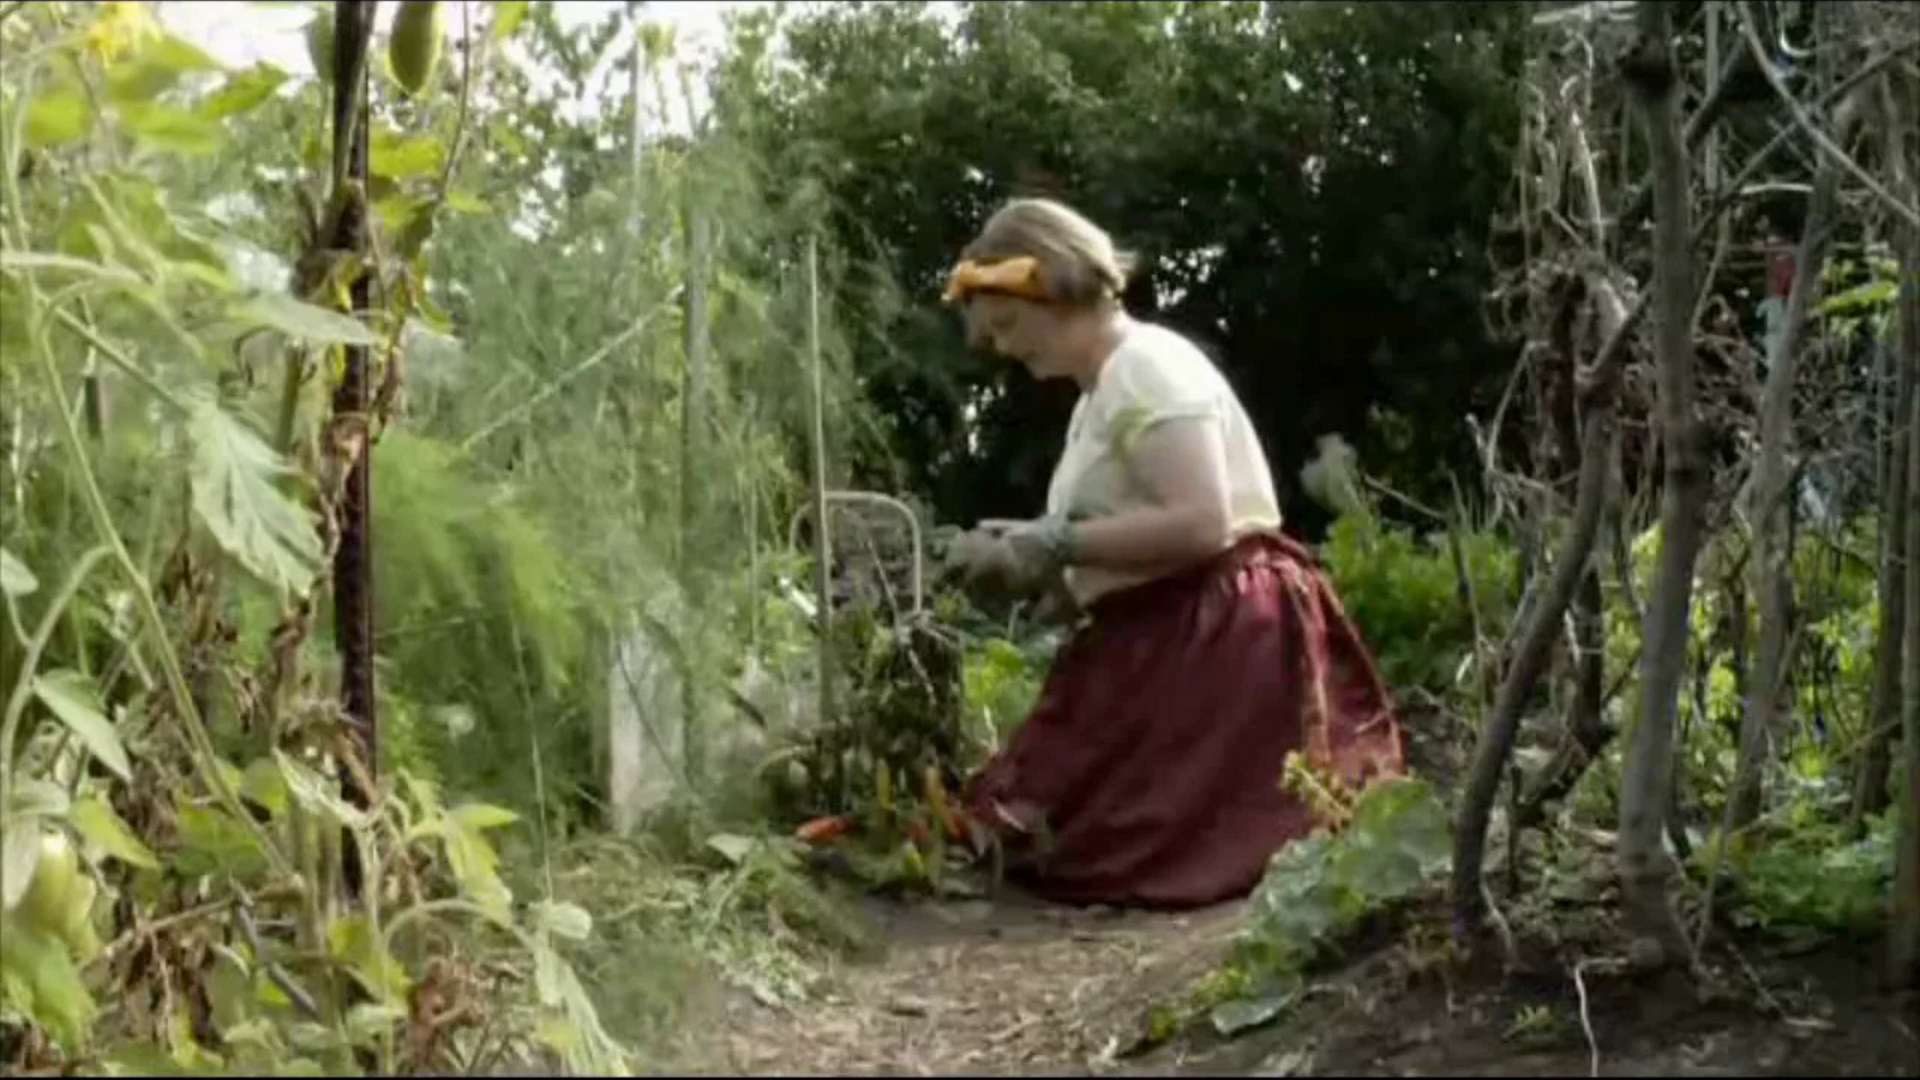 Screen capture from How Does Your Garden Grow